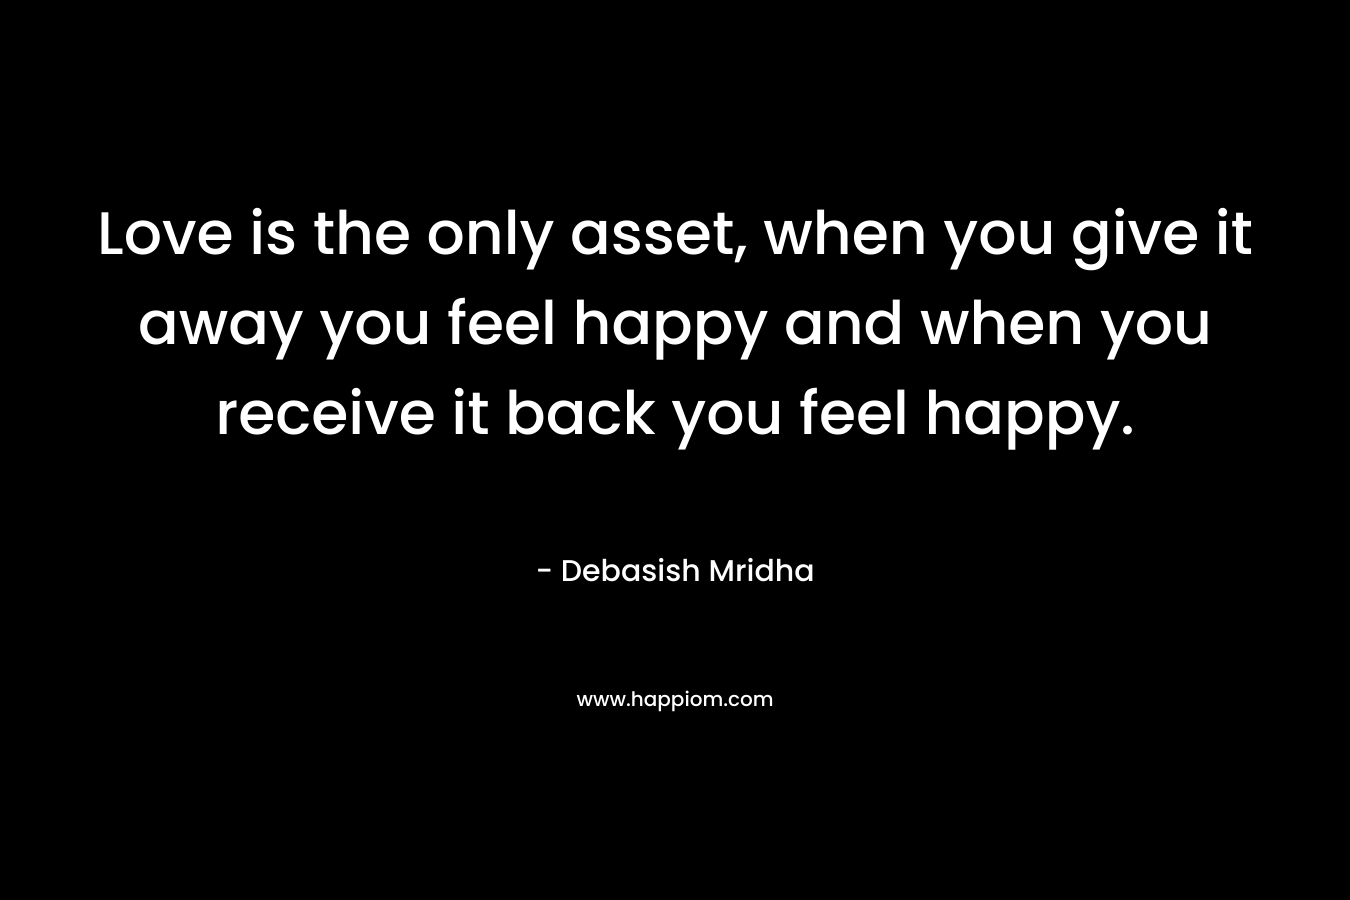 Love is the only asset, when you give it away you feel happy and when you receive it back you feel happy. – Debasish Mridha